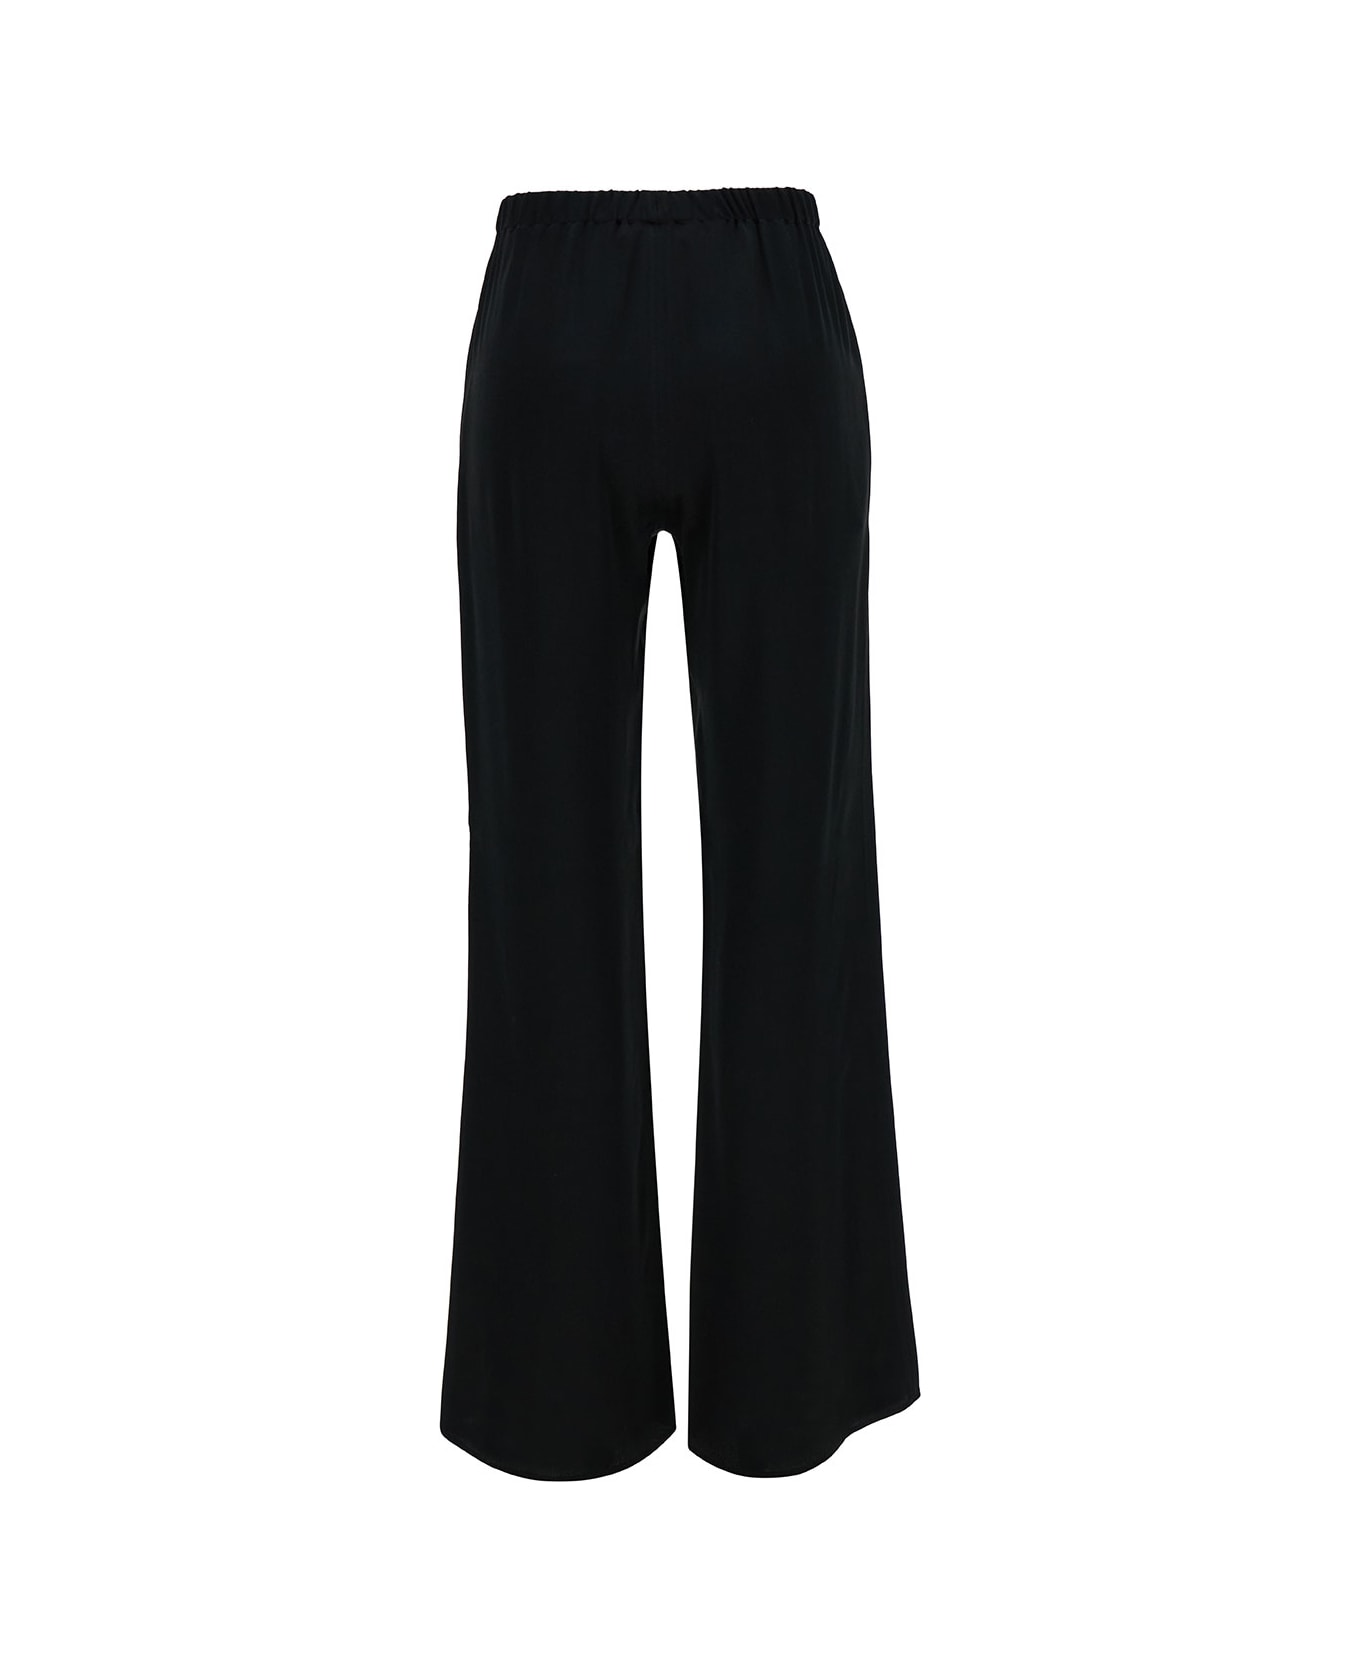 Antonelli Black Loose Pants With Elastic Waistband In Silk Blend Woman - Black